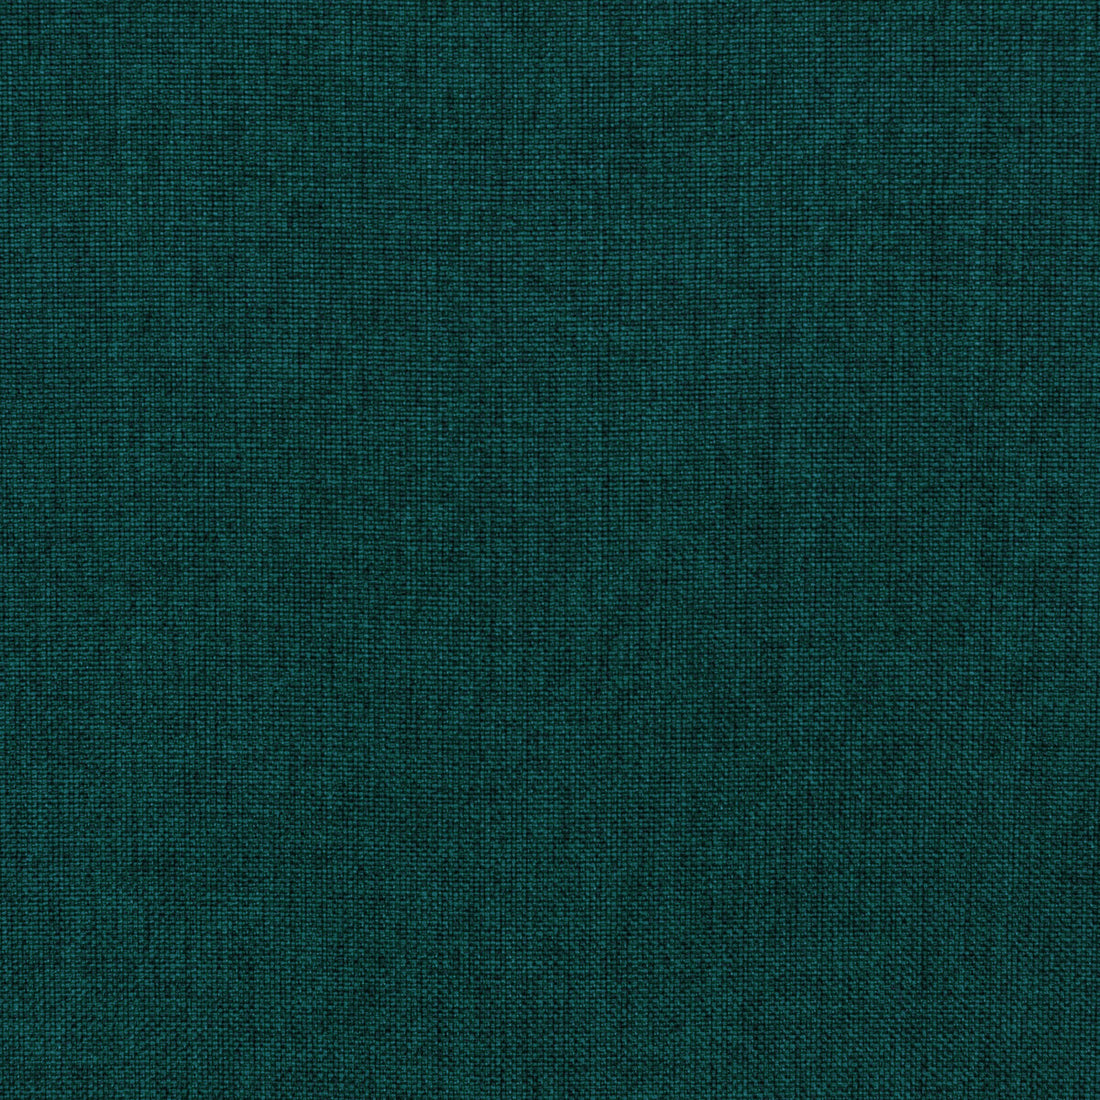 Fortify fabric in mermaid color - pattern 36257.35.0 - by Kravet Contract in the Supreen collection